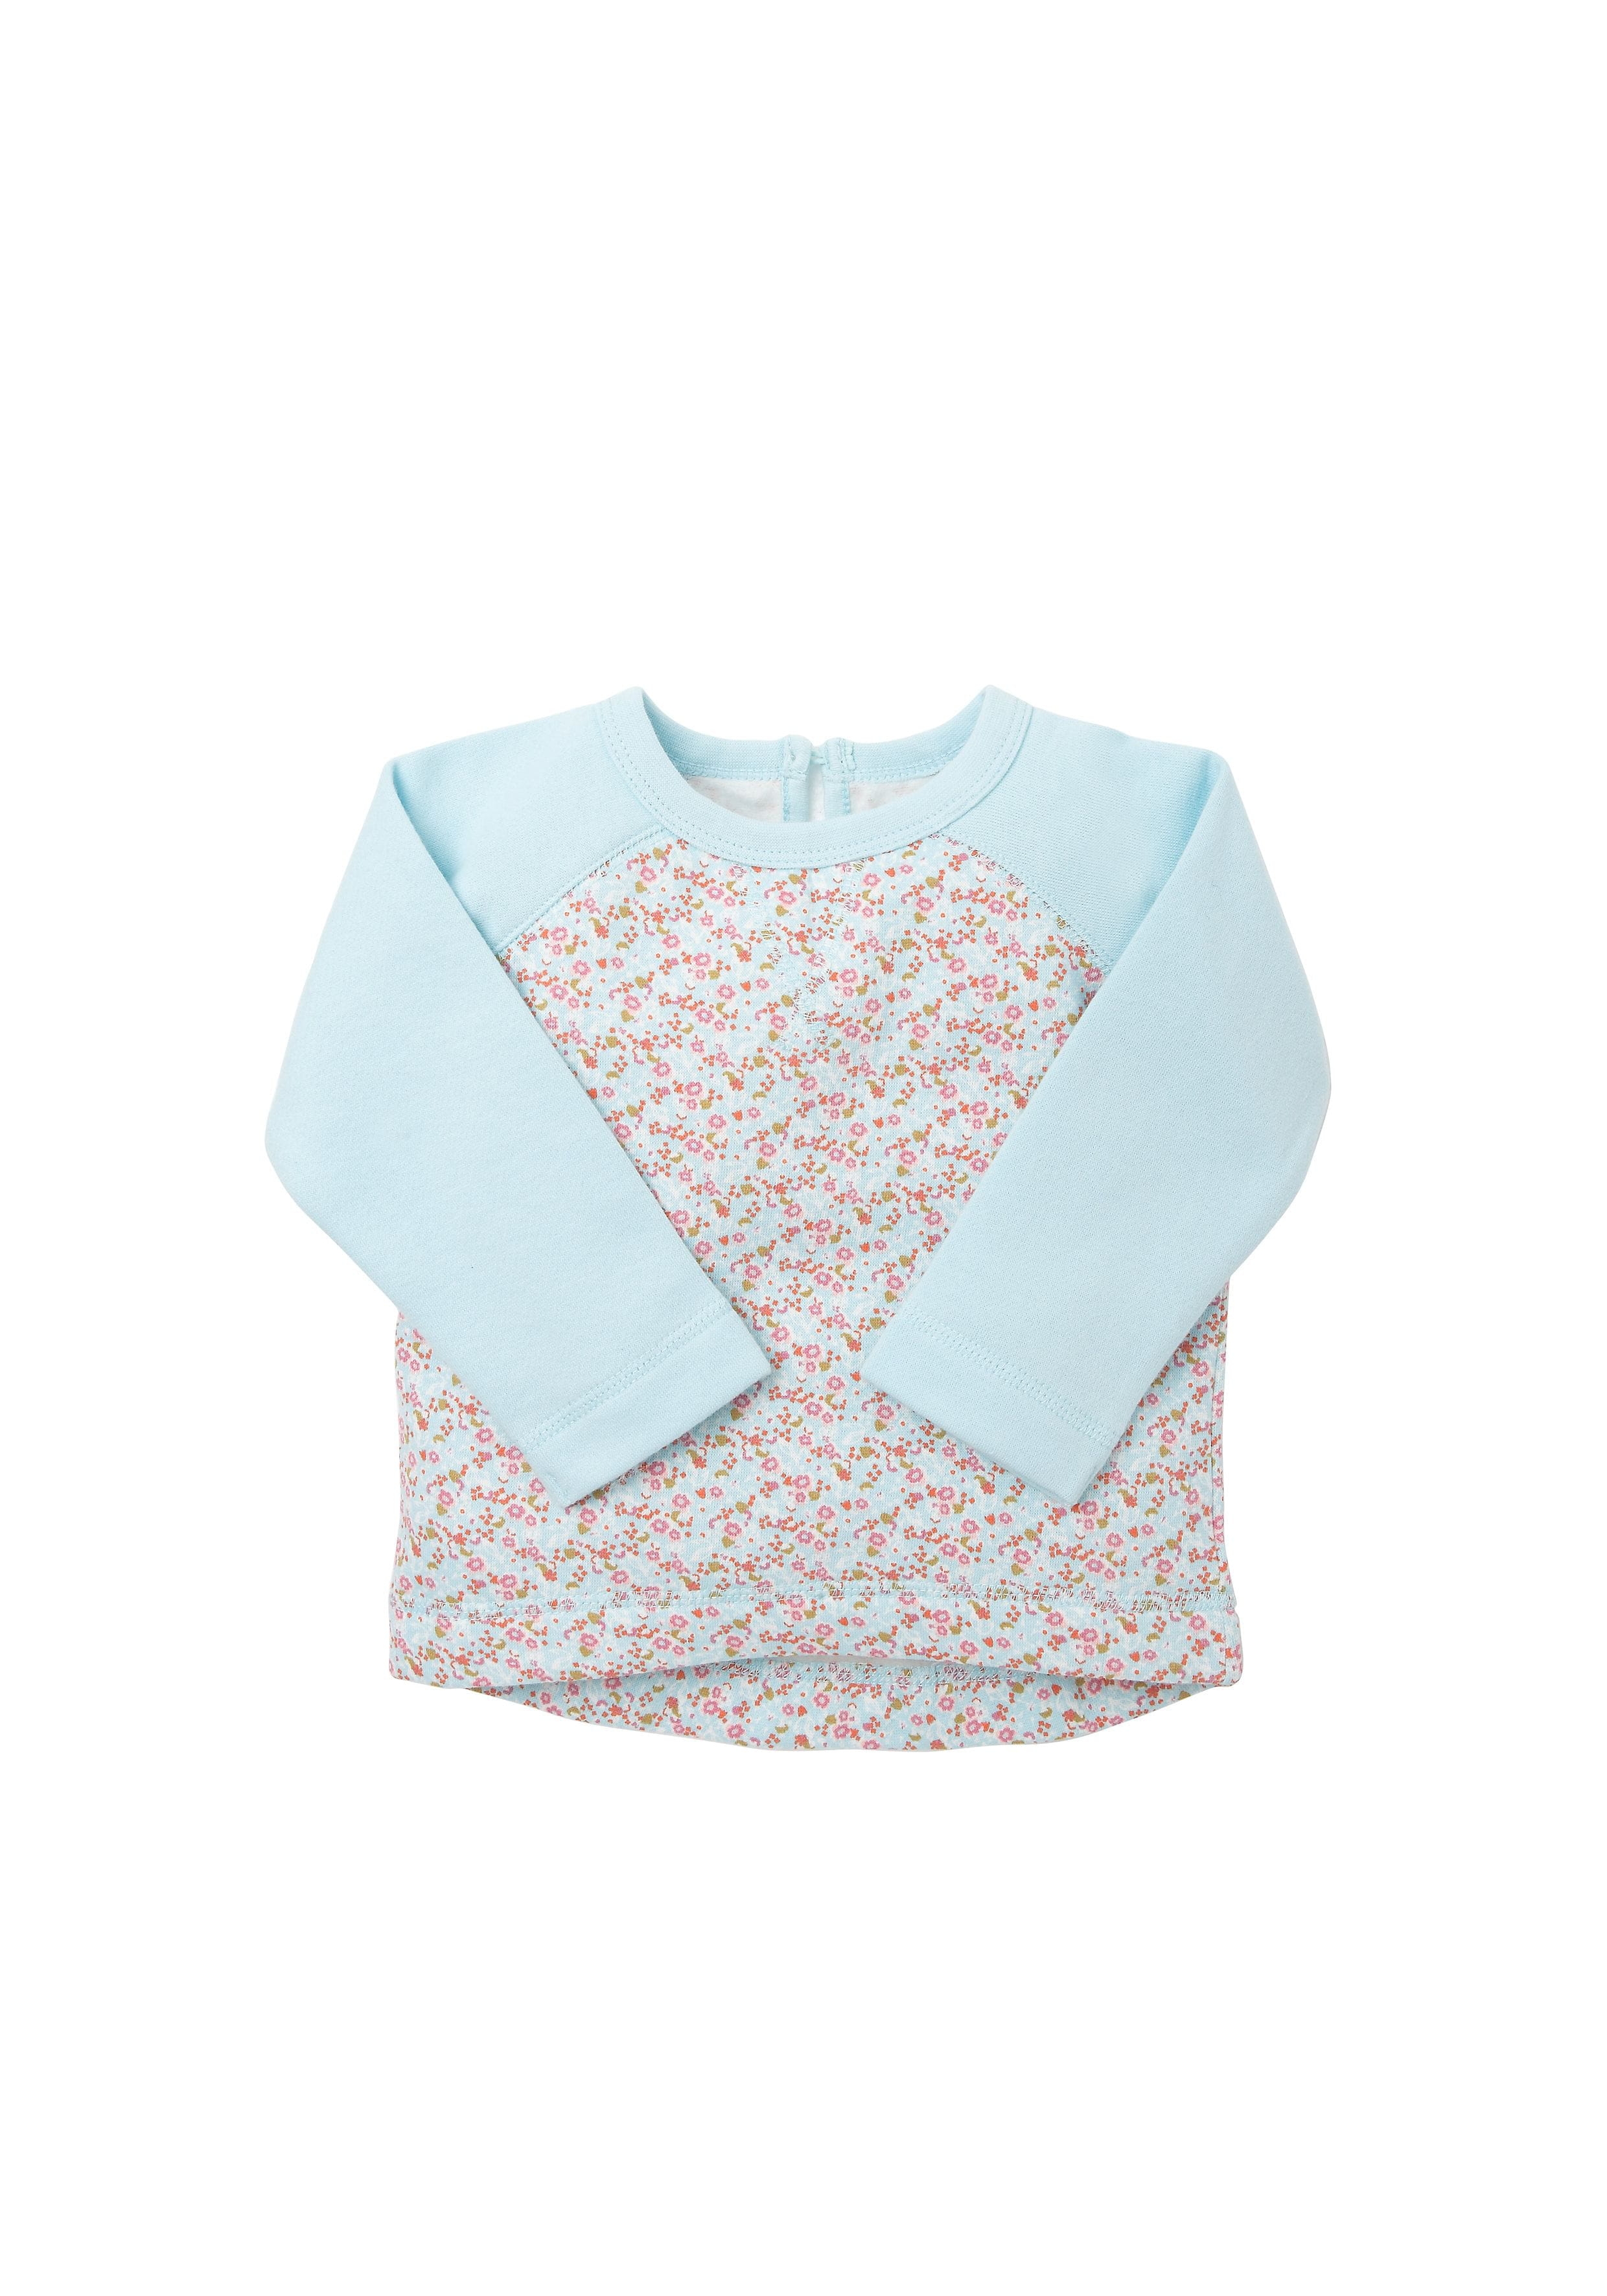 Mothercare | Girls Floral Sweat Top - Multicolor 0